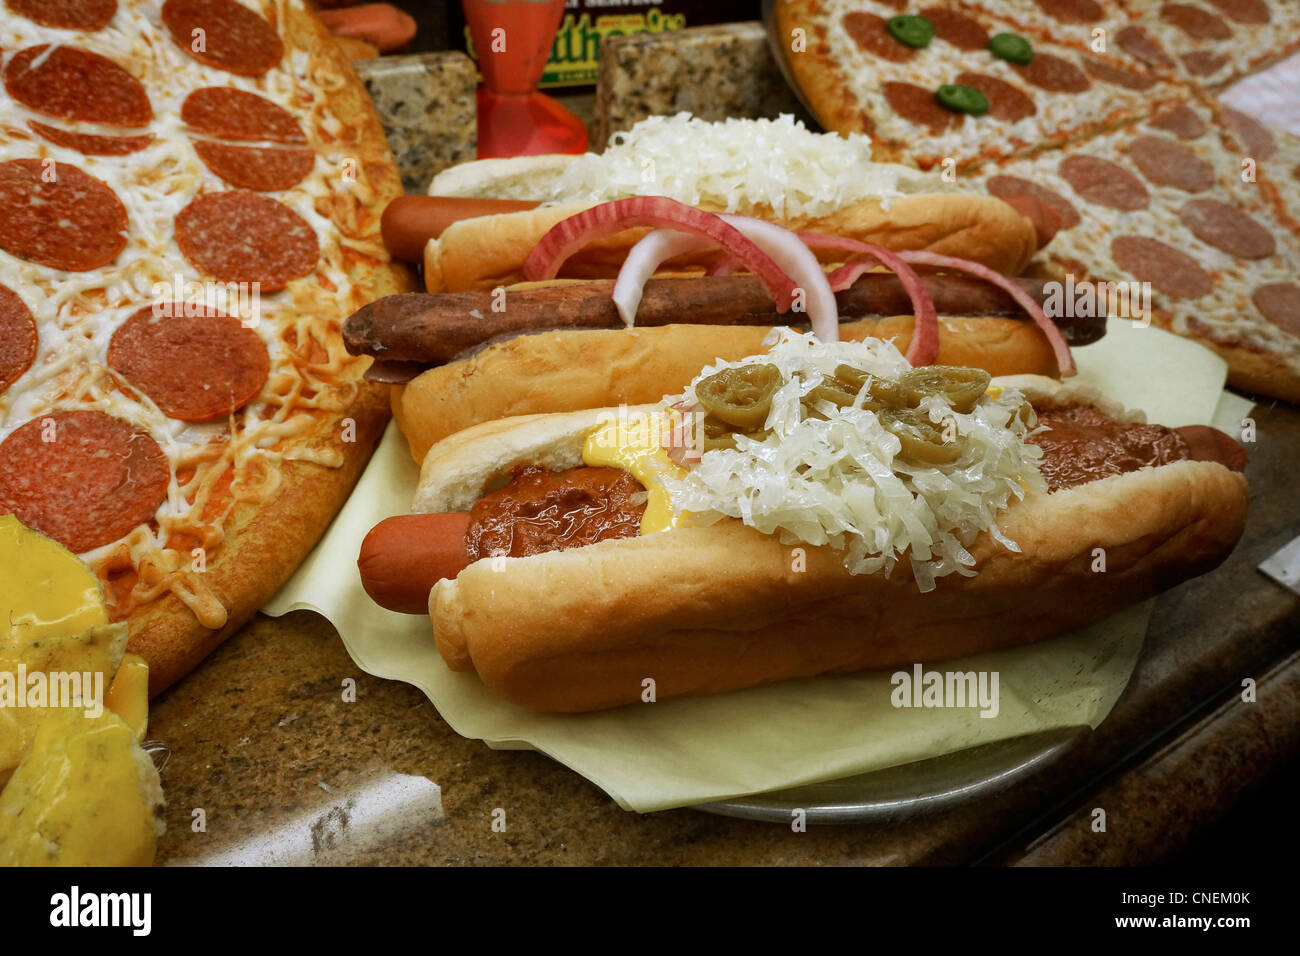 Hot Dogs and Pizza, on display for sale. Stock Photo